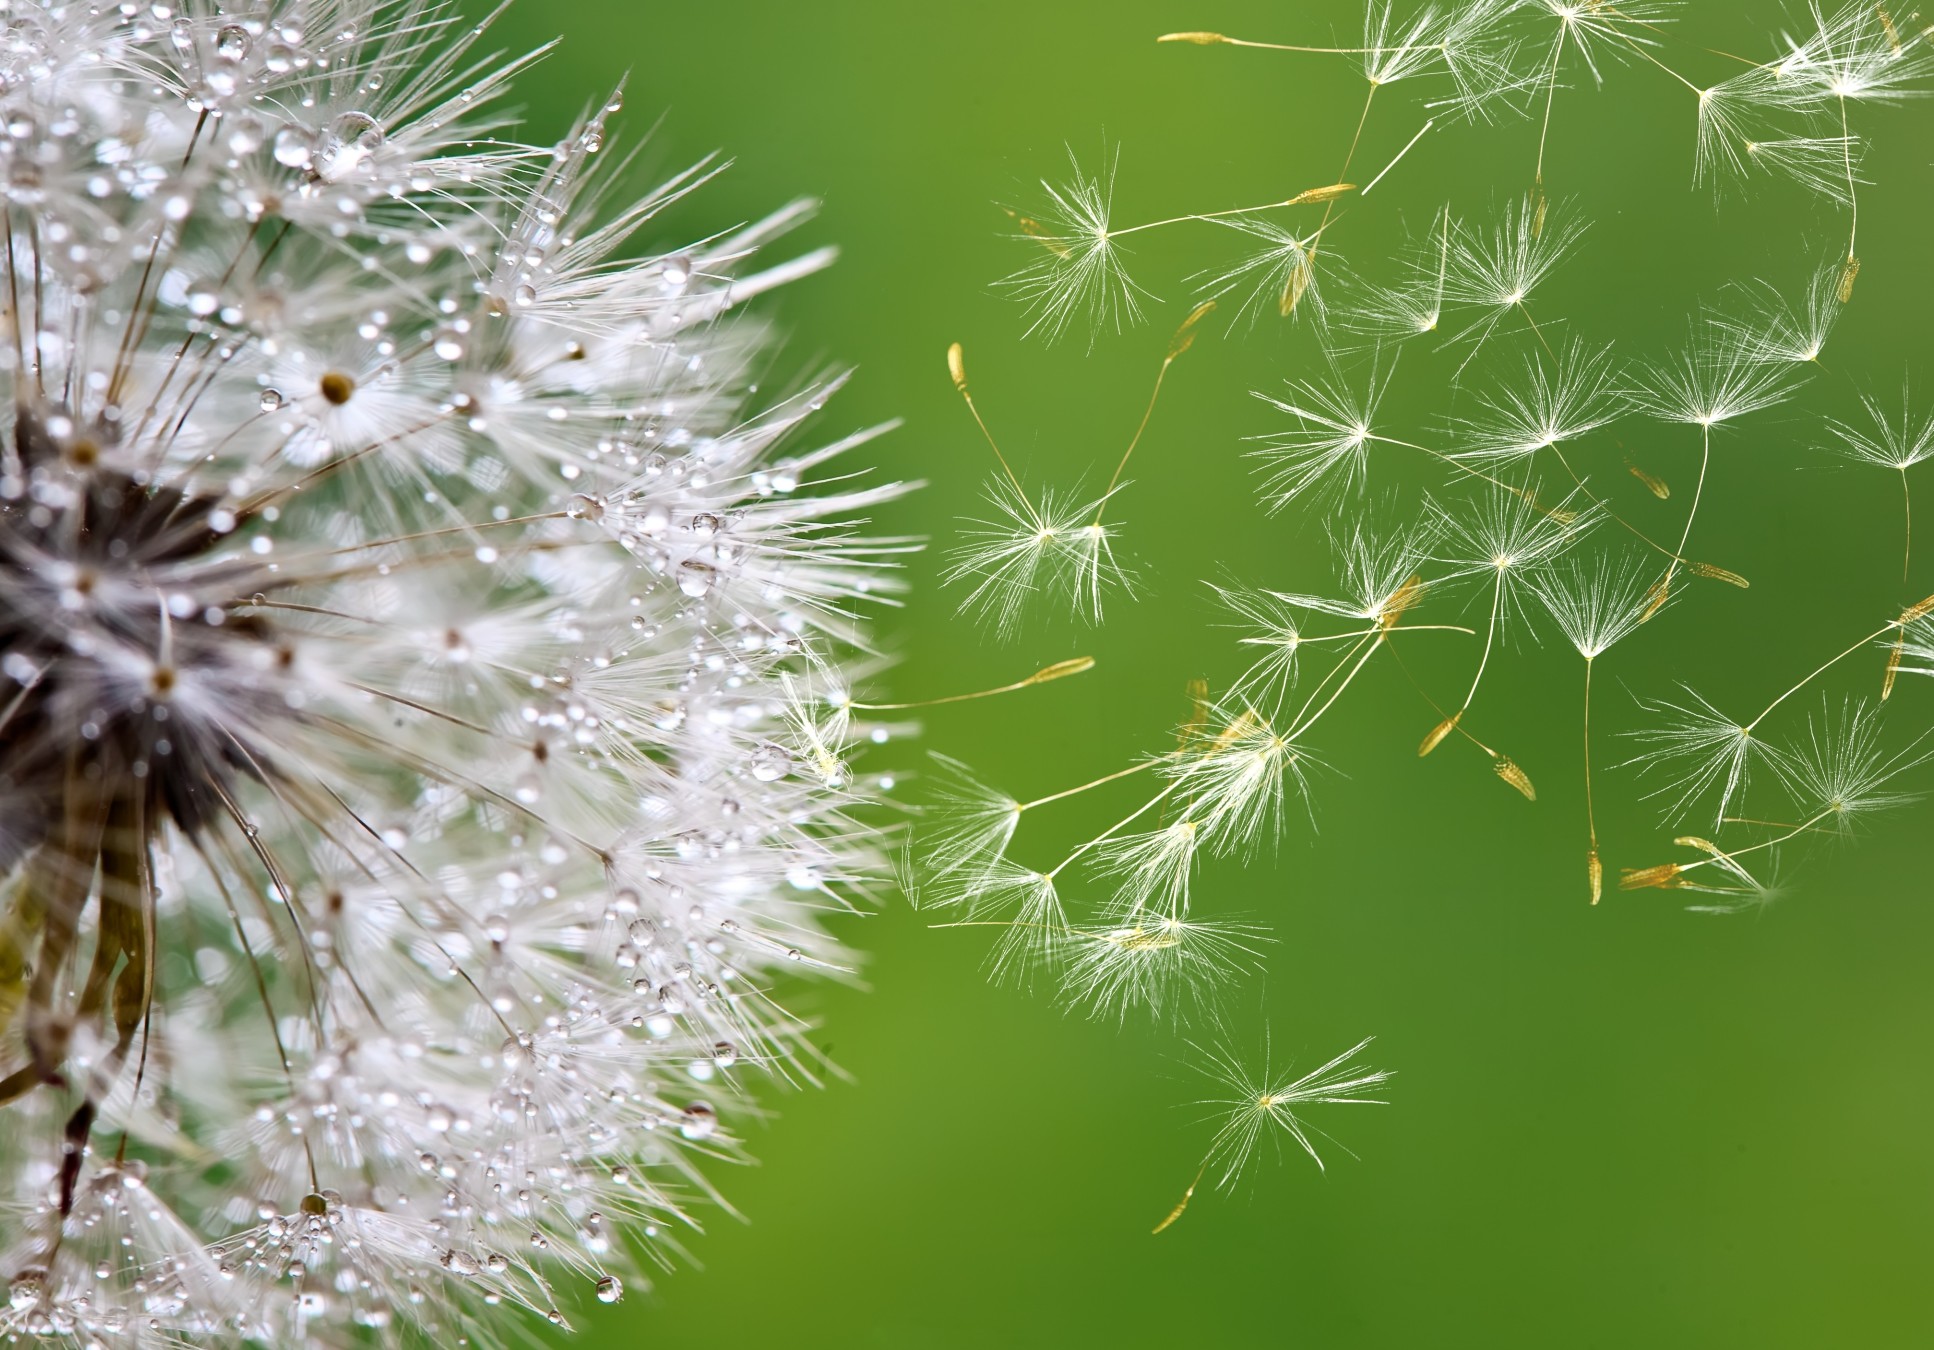 Up close image of a dandelion losing its seeds to the wind, carried by their fluffy parachutes